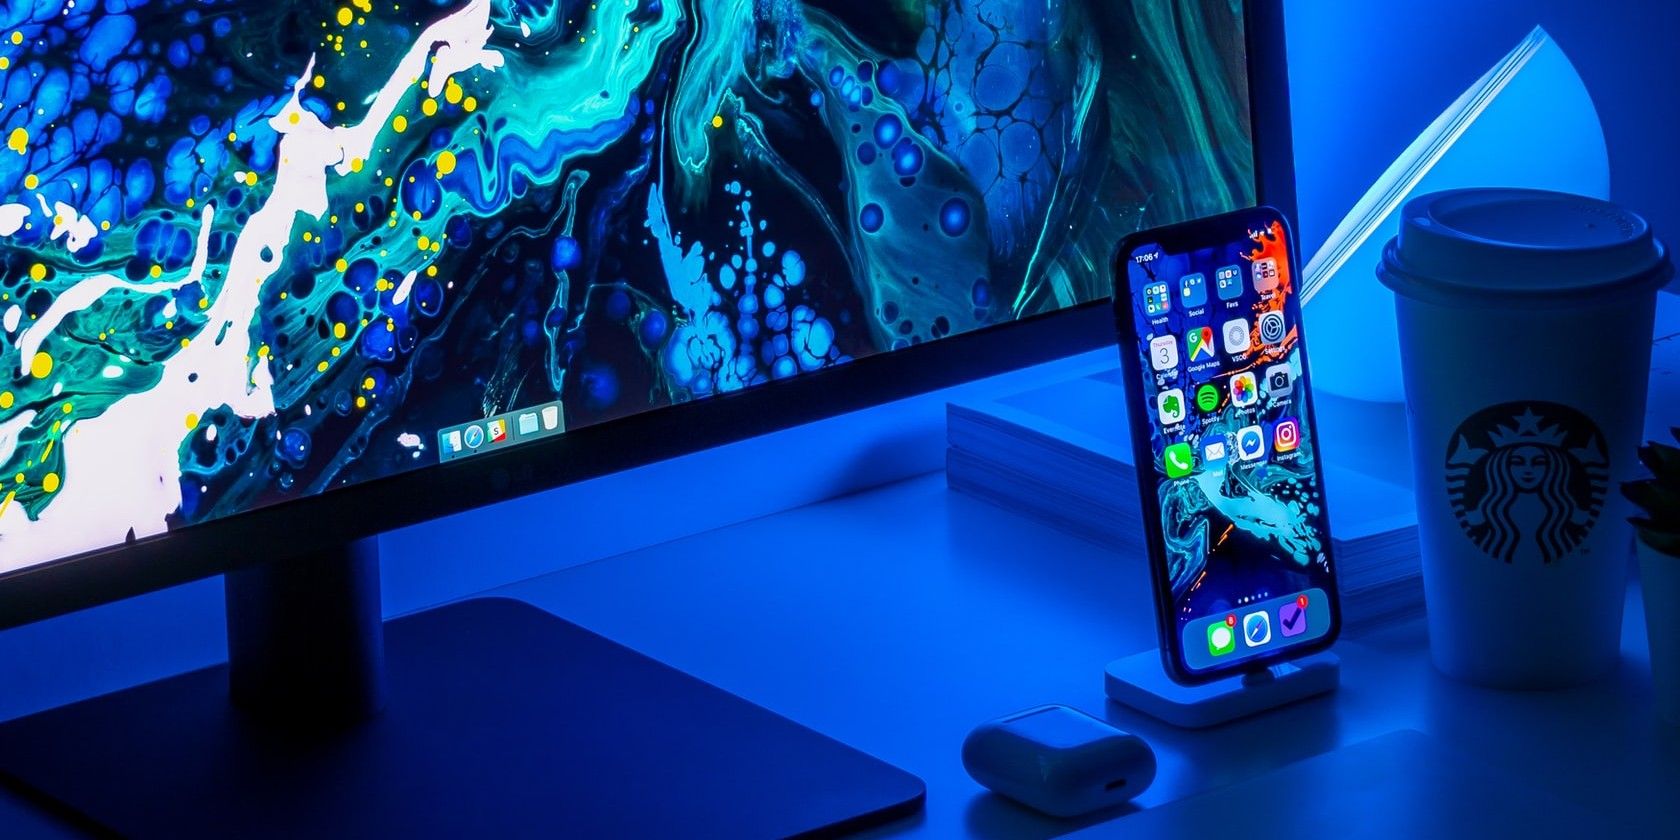 Desk setup with iPhone, AirPods, and Monitor